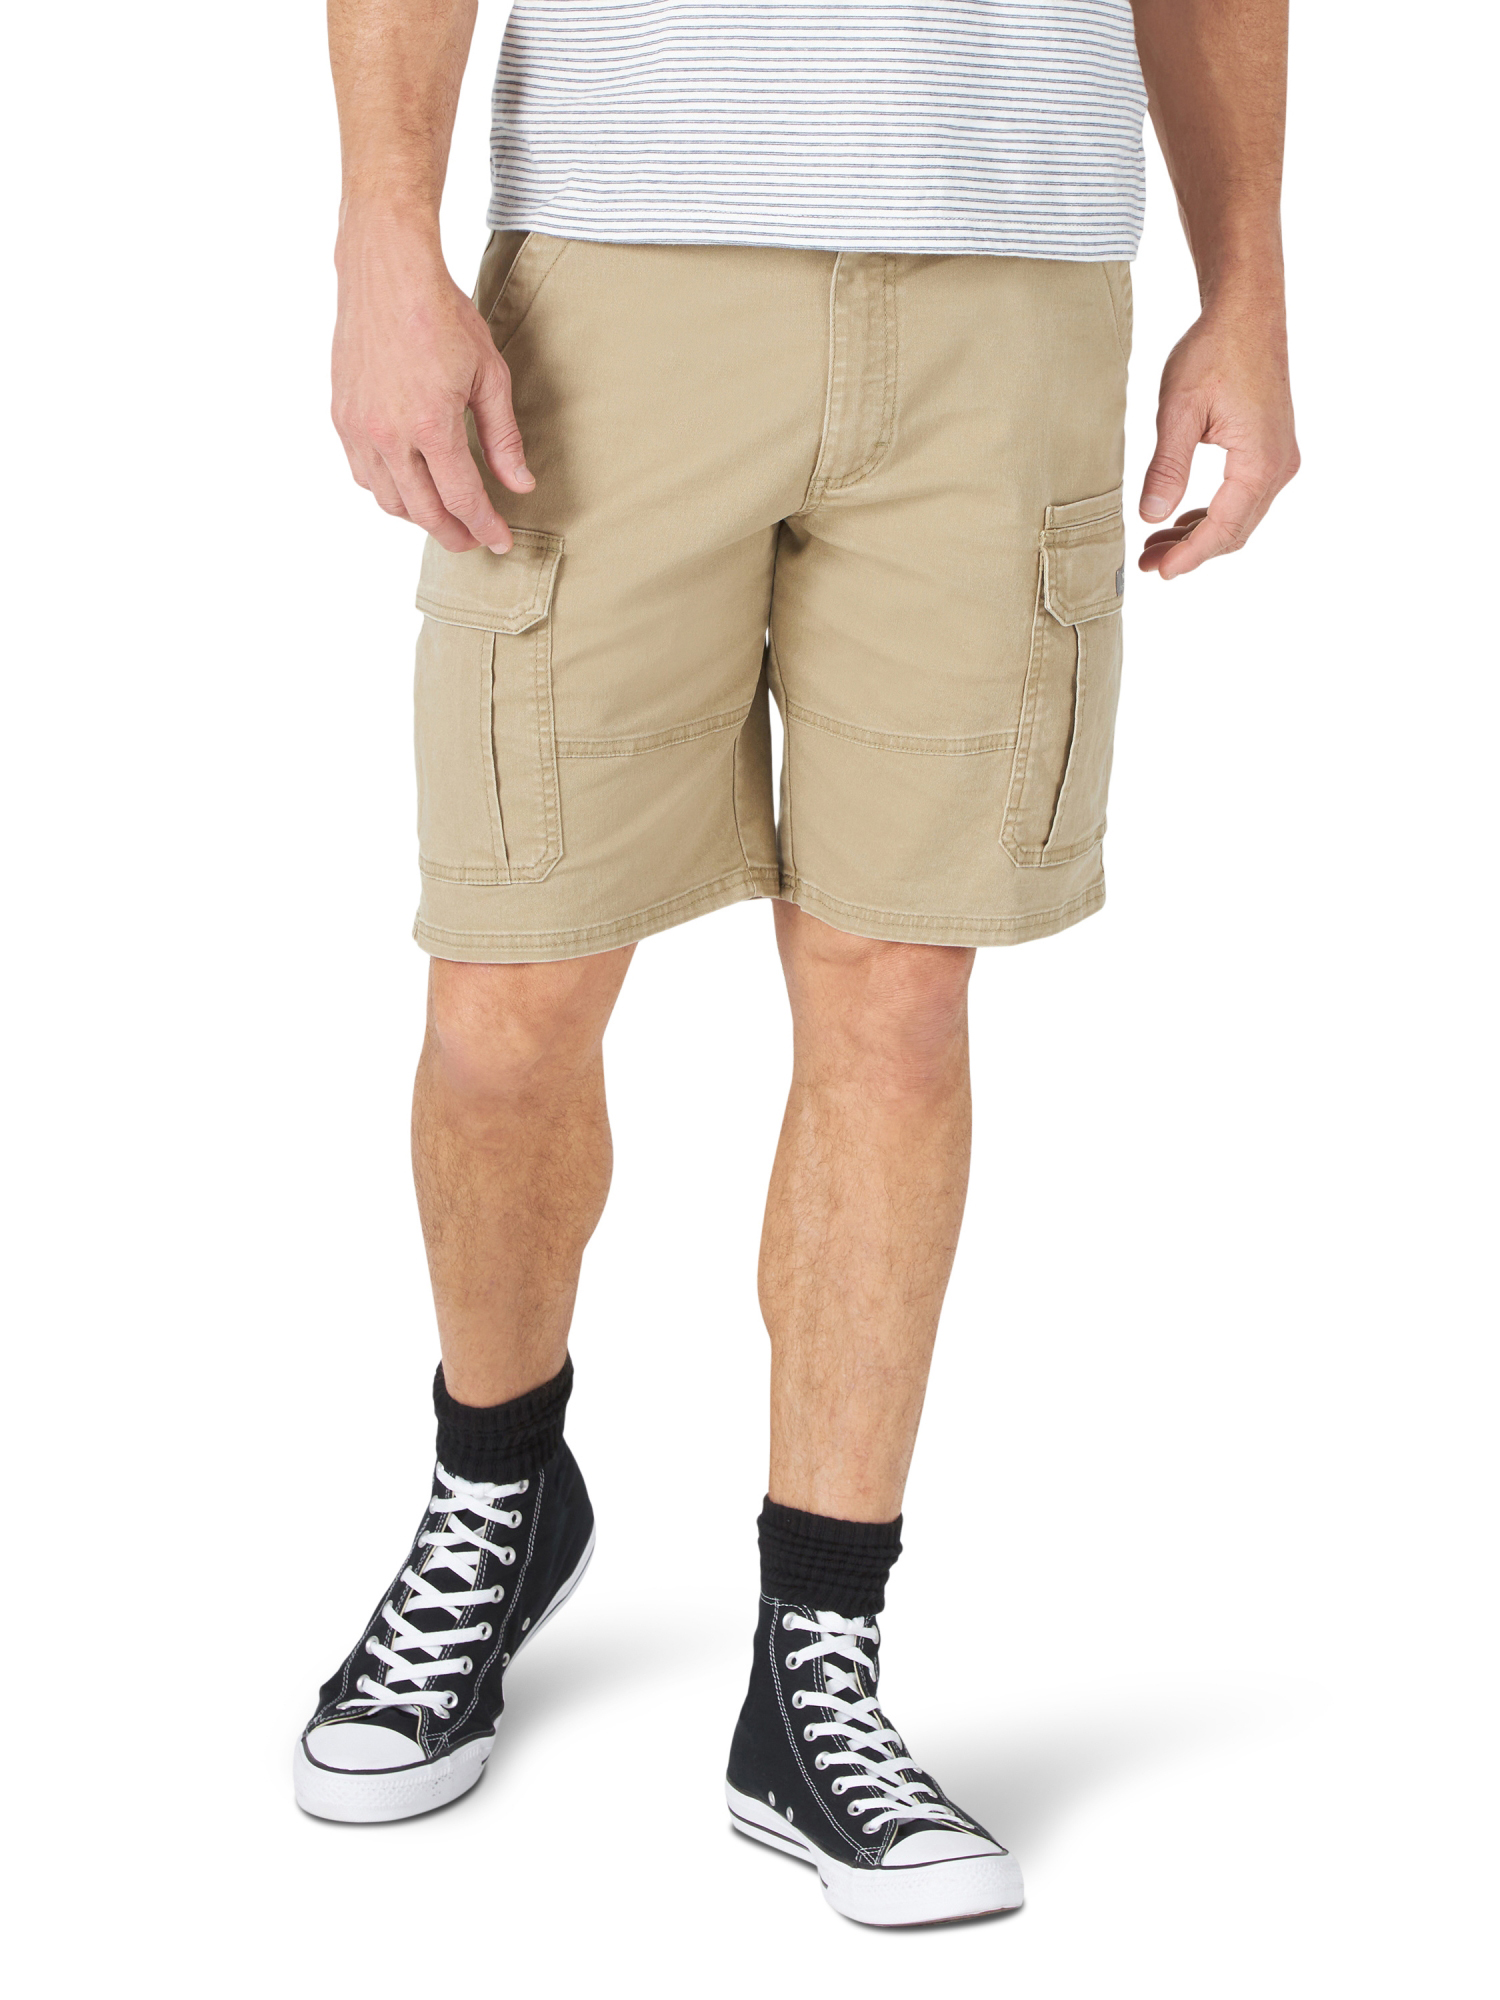 Wrangler Men's and Big Men's 10" Relaxed Fit Cargo Shorts With Stretch - image 1 of 8